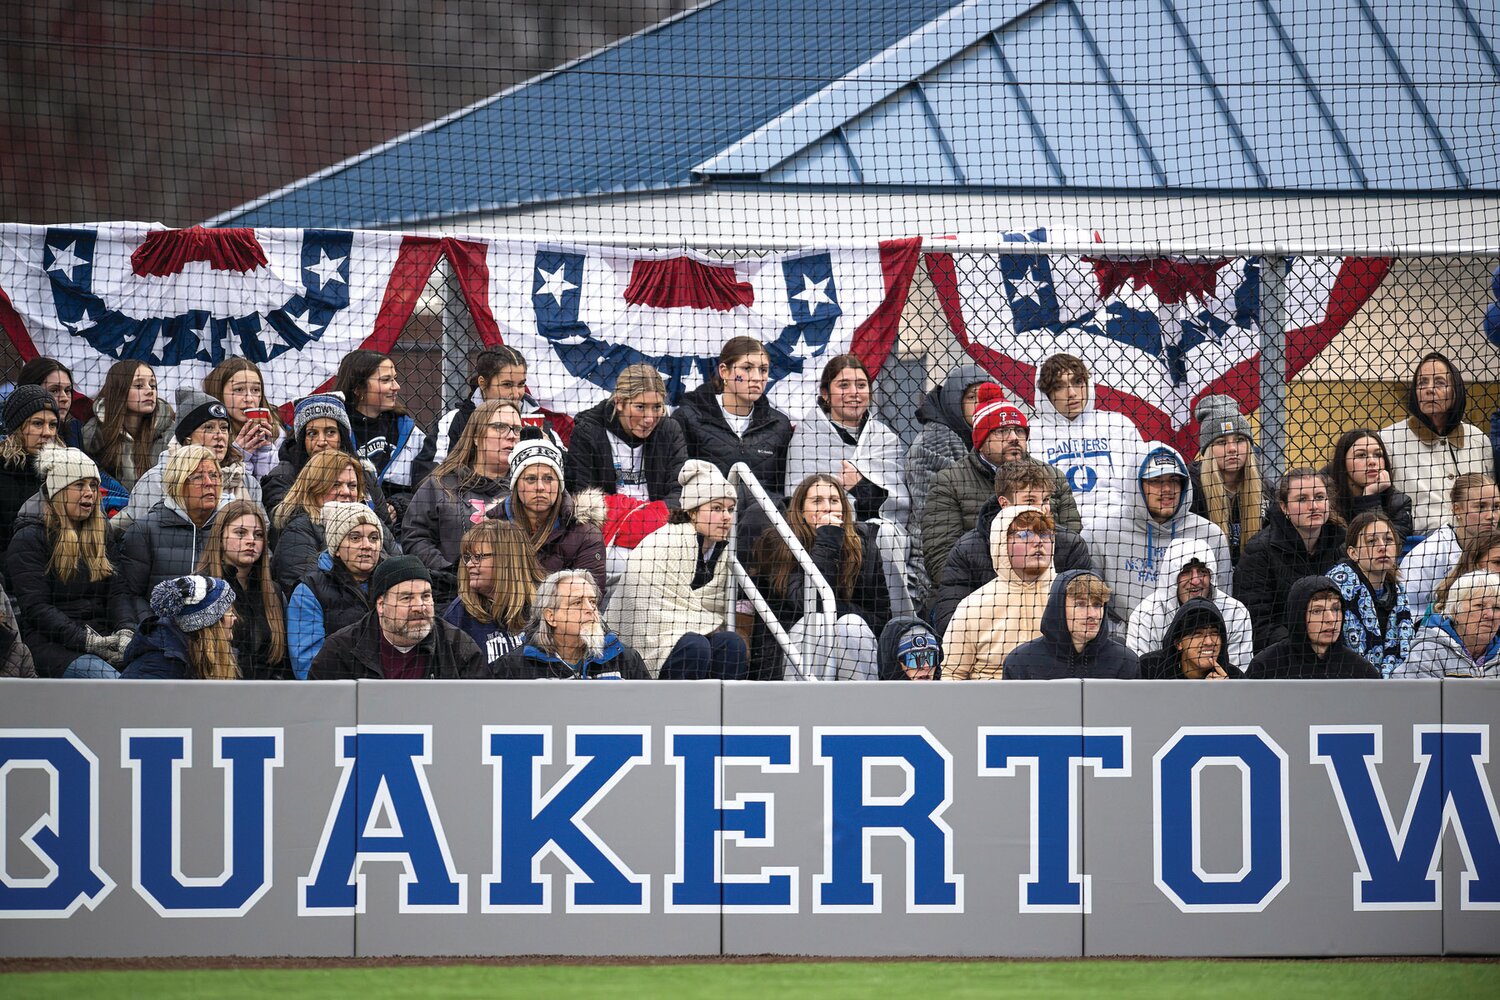 The cold weather didn’t stop fans from packing the stands on opening night of the new field.